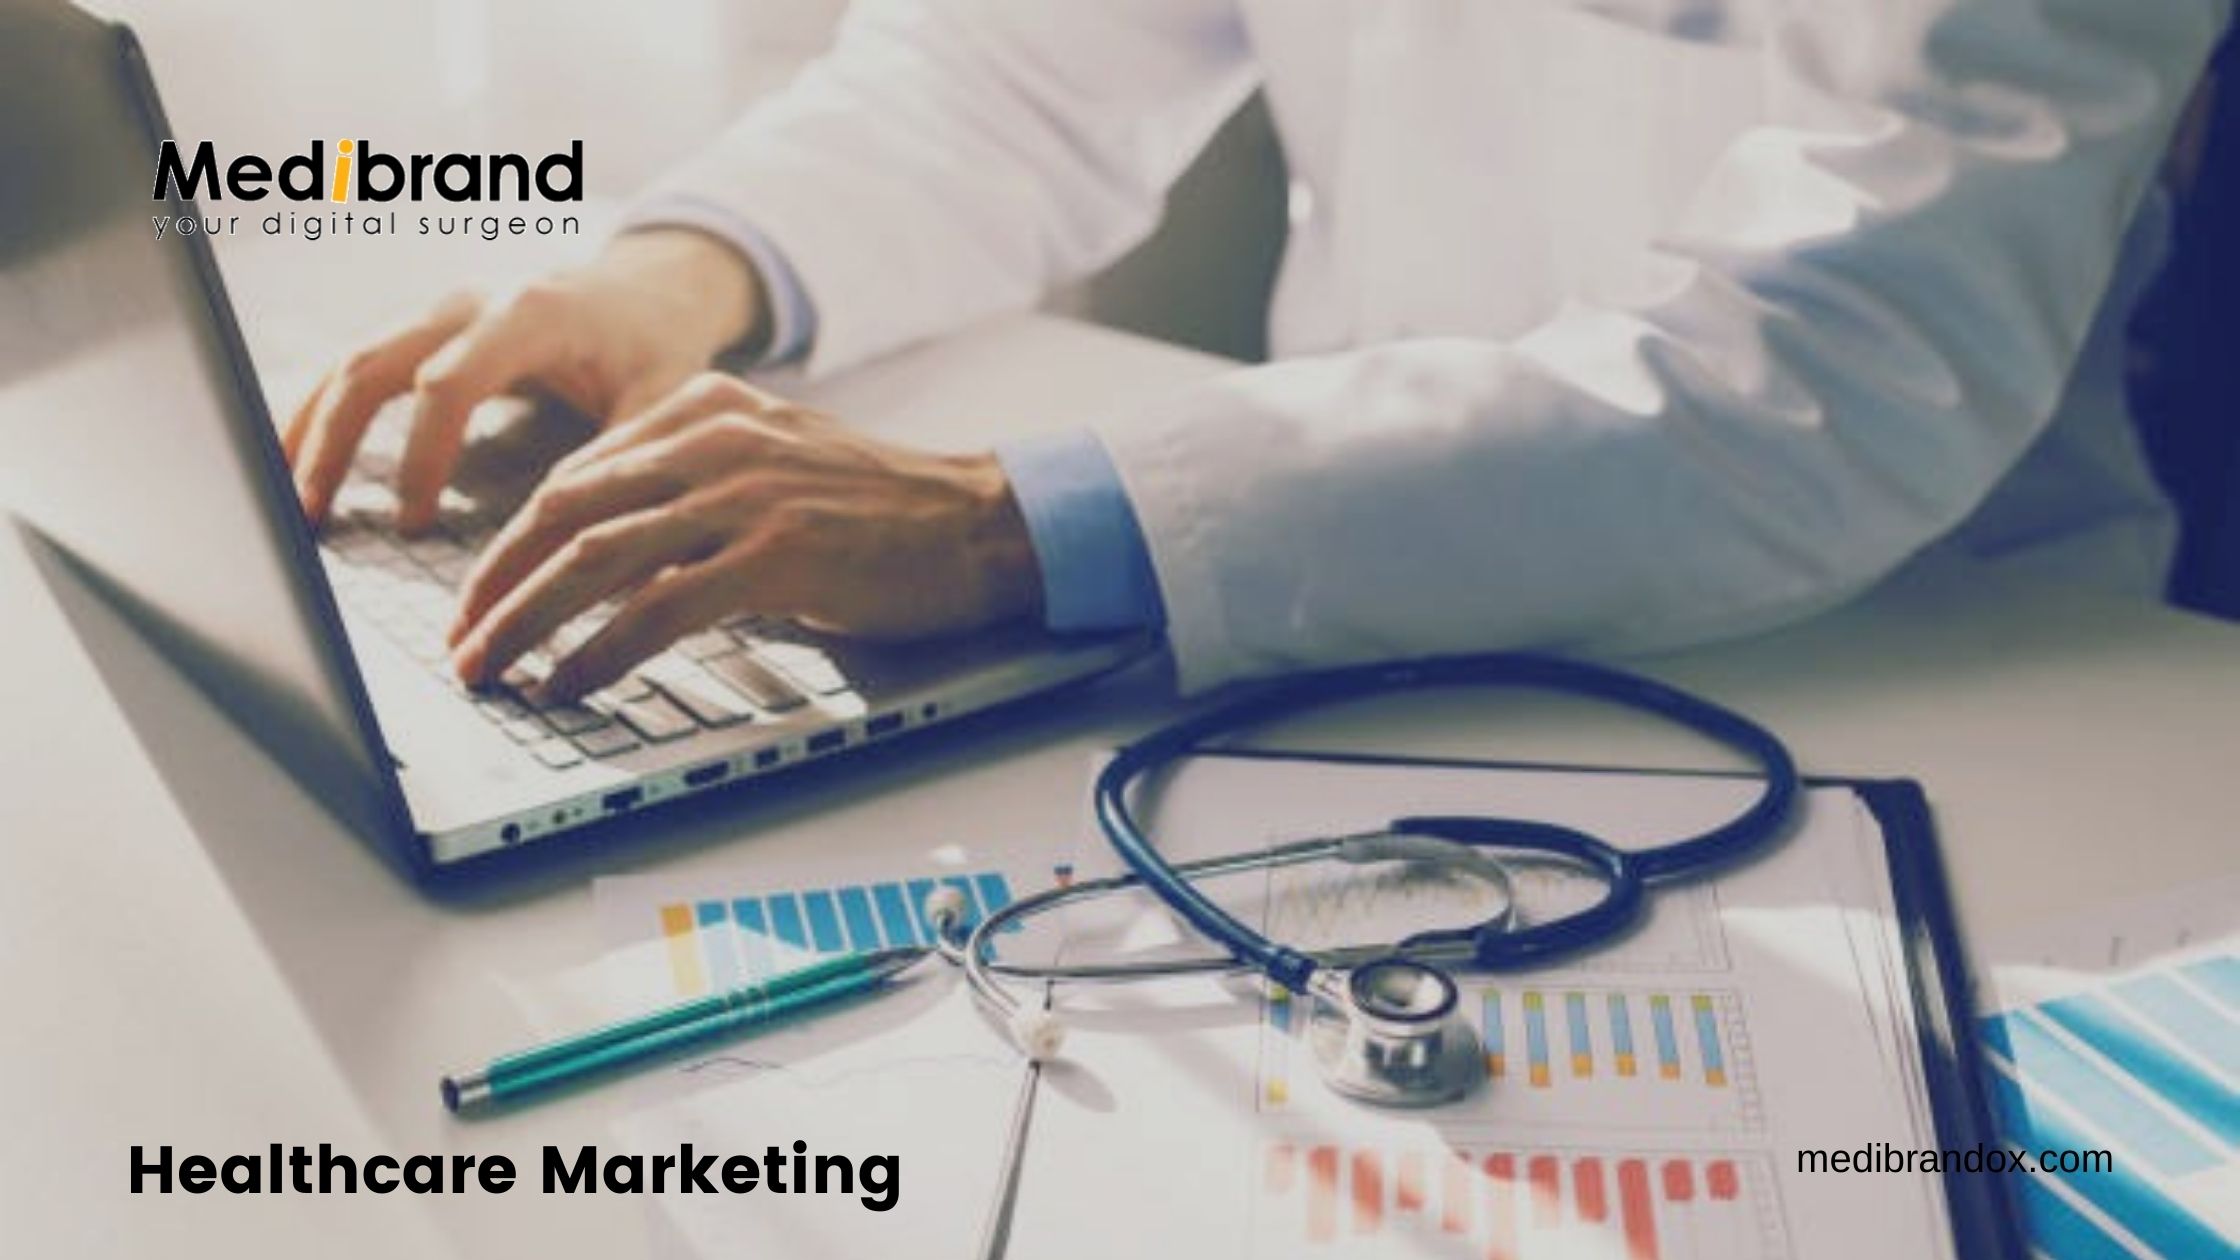 Article about Healthcare Marketing Makes Strategies for Doctors, Hospitals